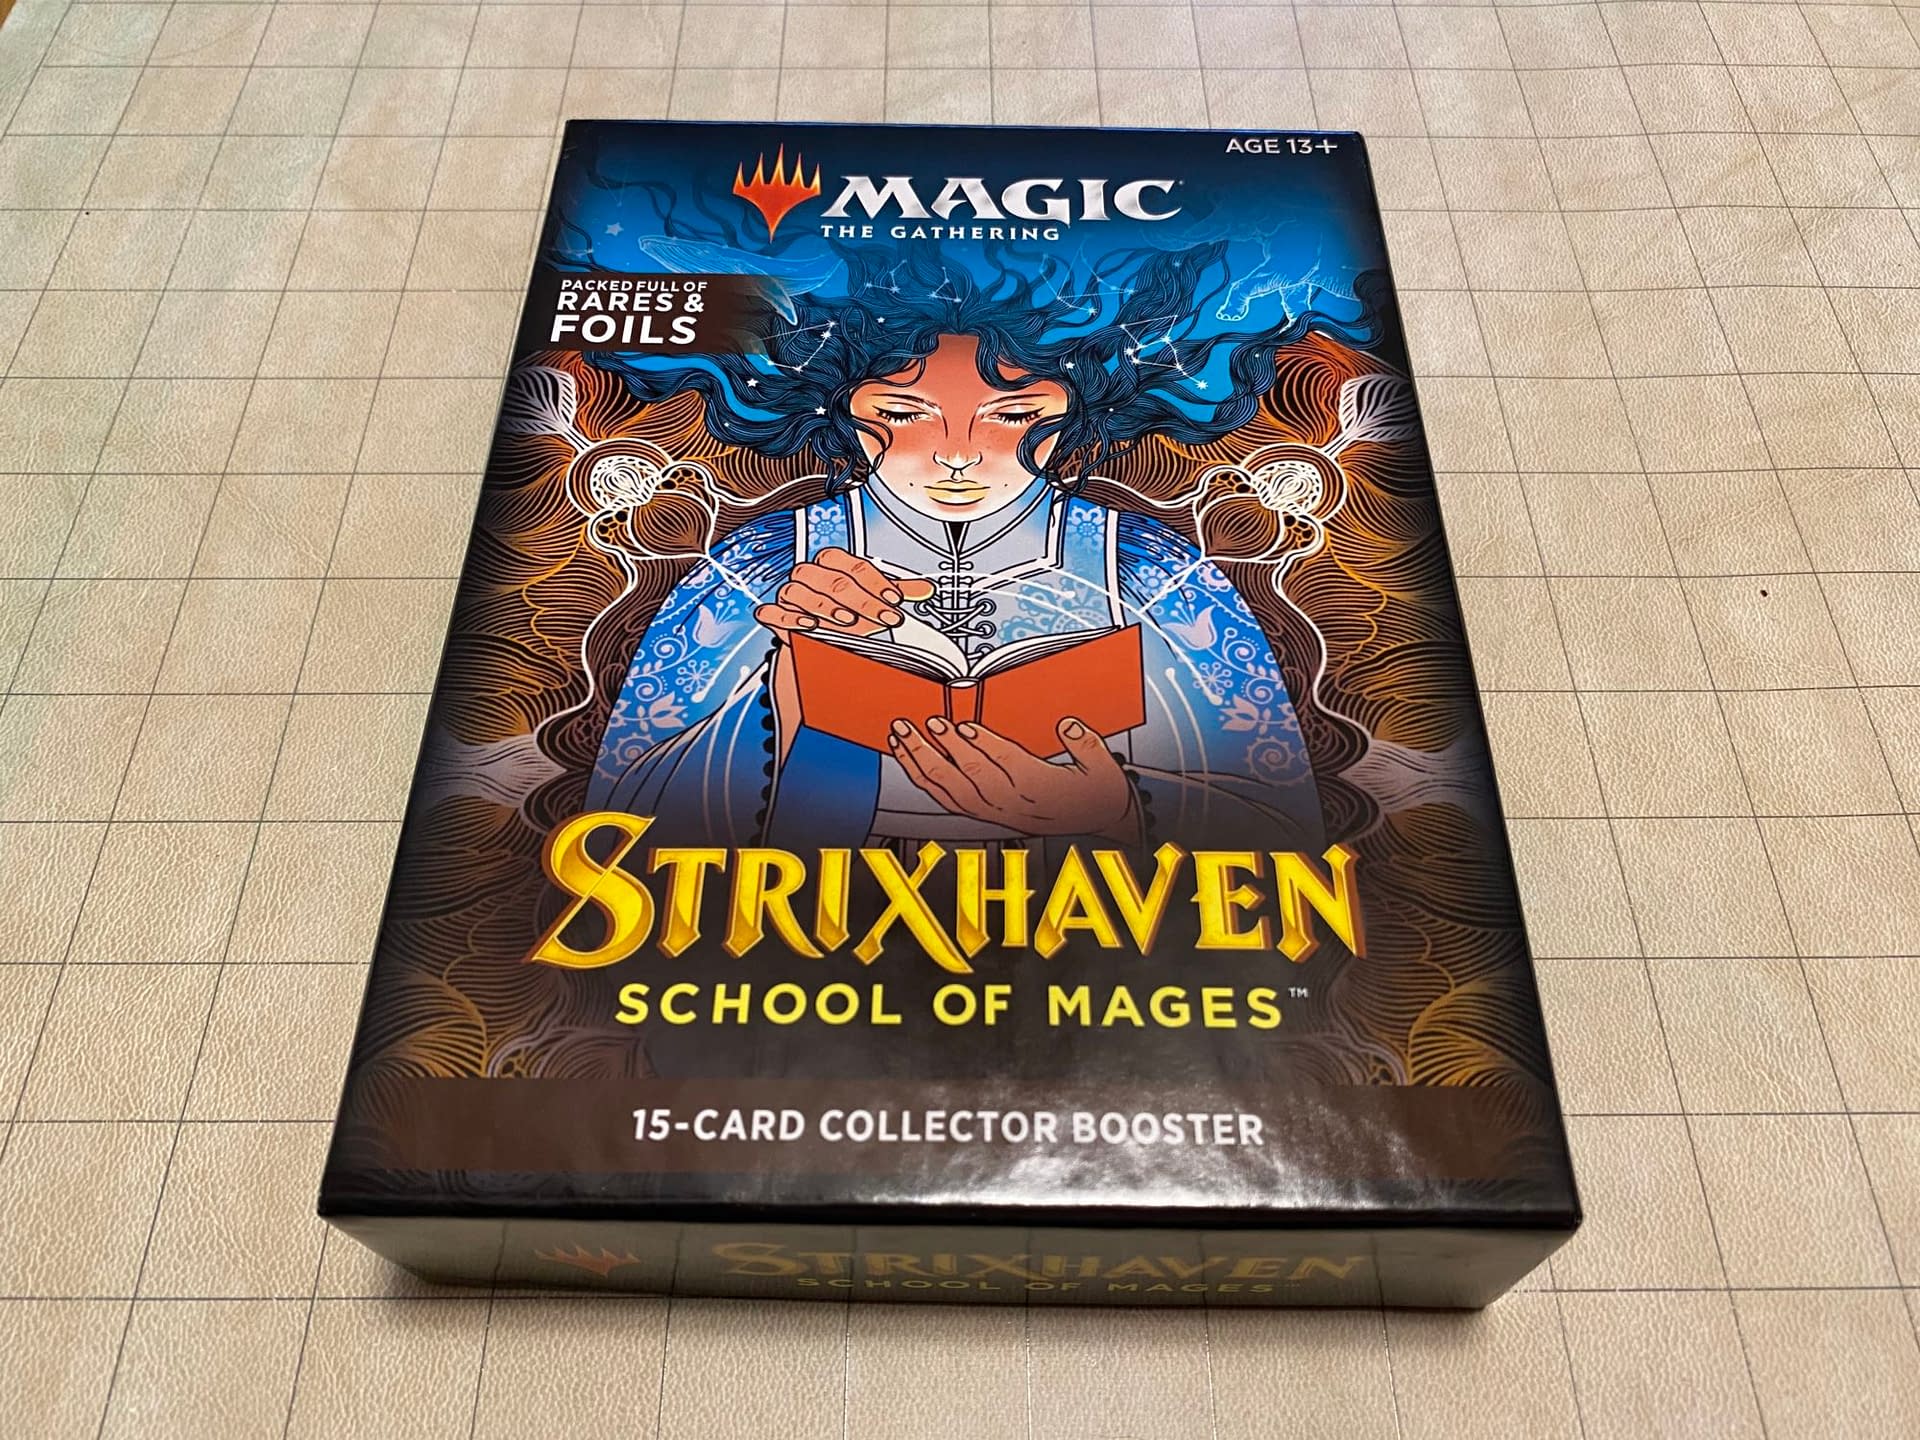 MTG - Is It Worth It To Buy A Booster Box? - A detailed analysis for Magic:  The Gathering 